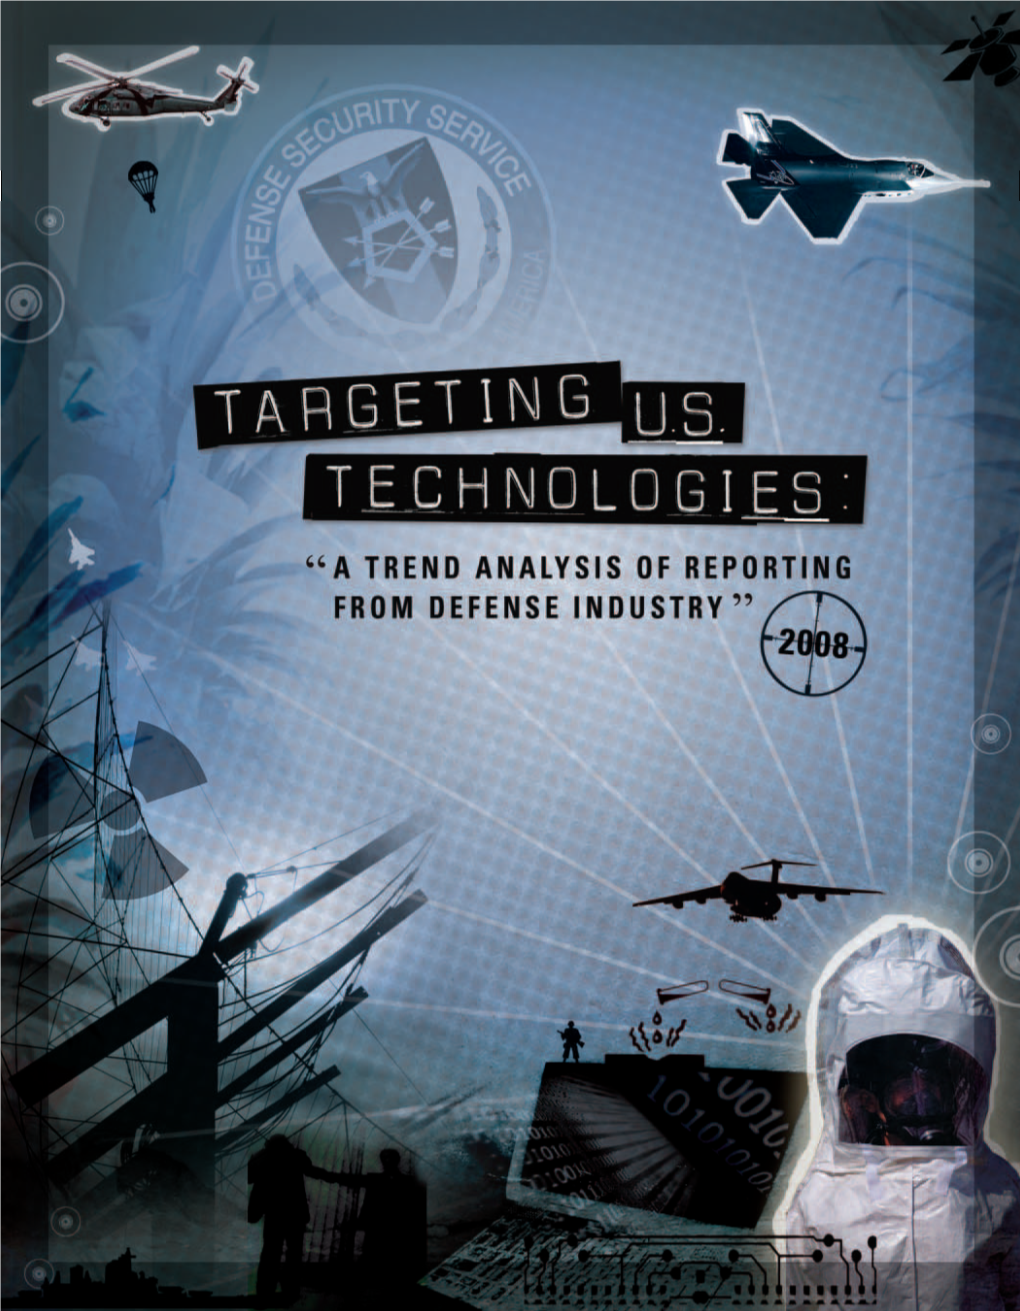 A Trend Analysis of Reporting from Defense Industry